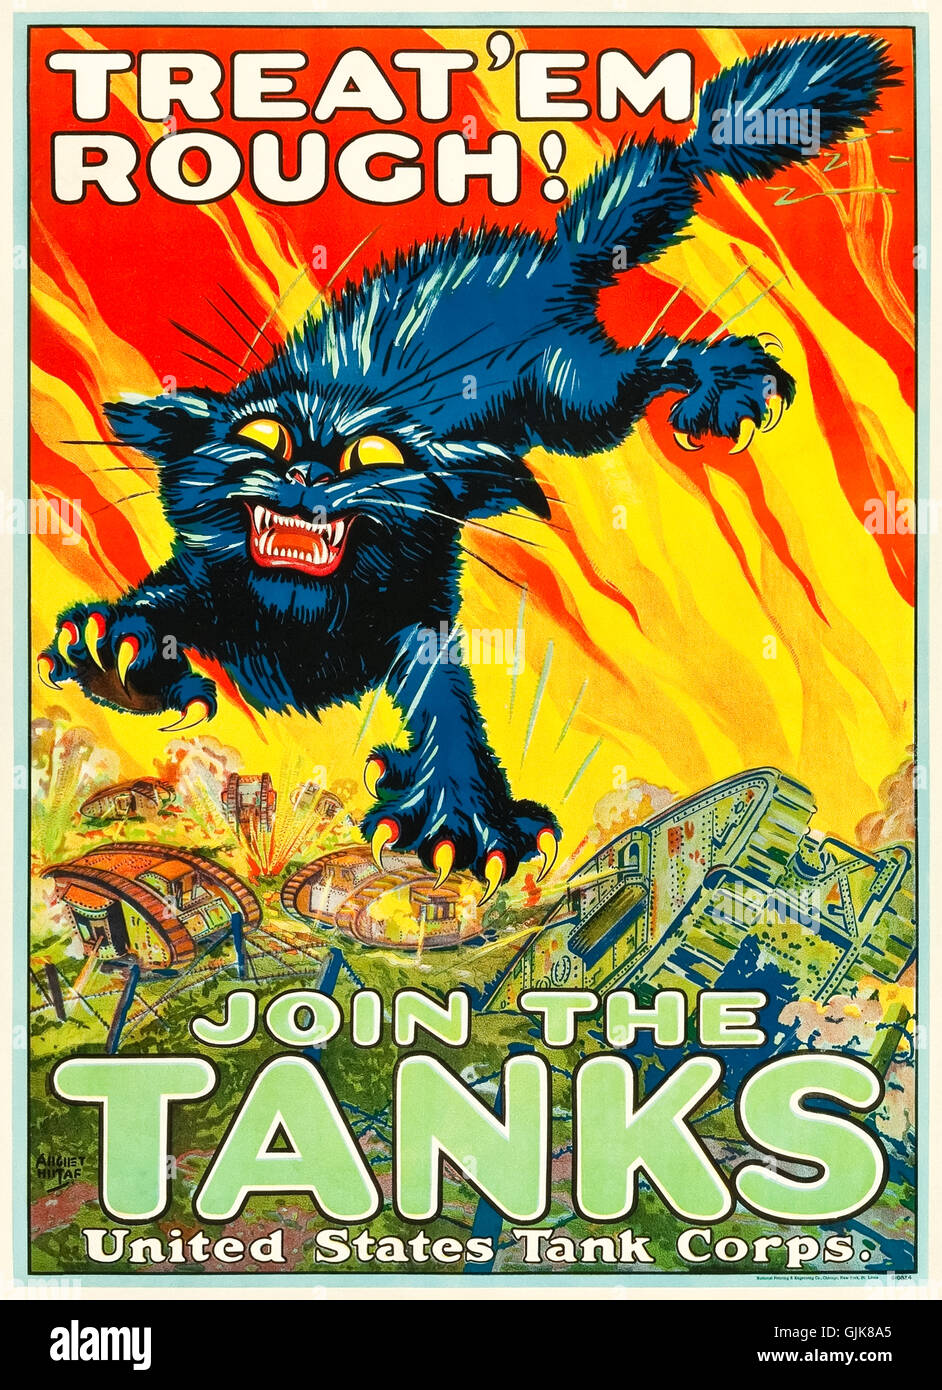 “TREAT’EM ROUGH! JOIN THE TANKS” 1917 World War I recruitment poster for the newly formed United States Tank Corps, illustration by August “Gus” William Hutaf (1874-1942). The tanks pictured are British Mark IV as America had no tanks when it first entered the war in 1917. See description for more information. Stock Photo